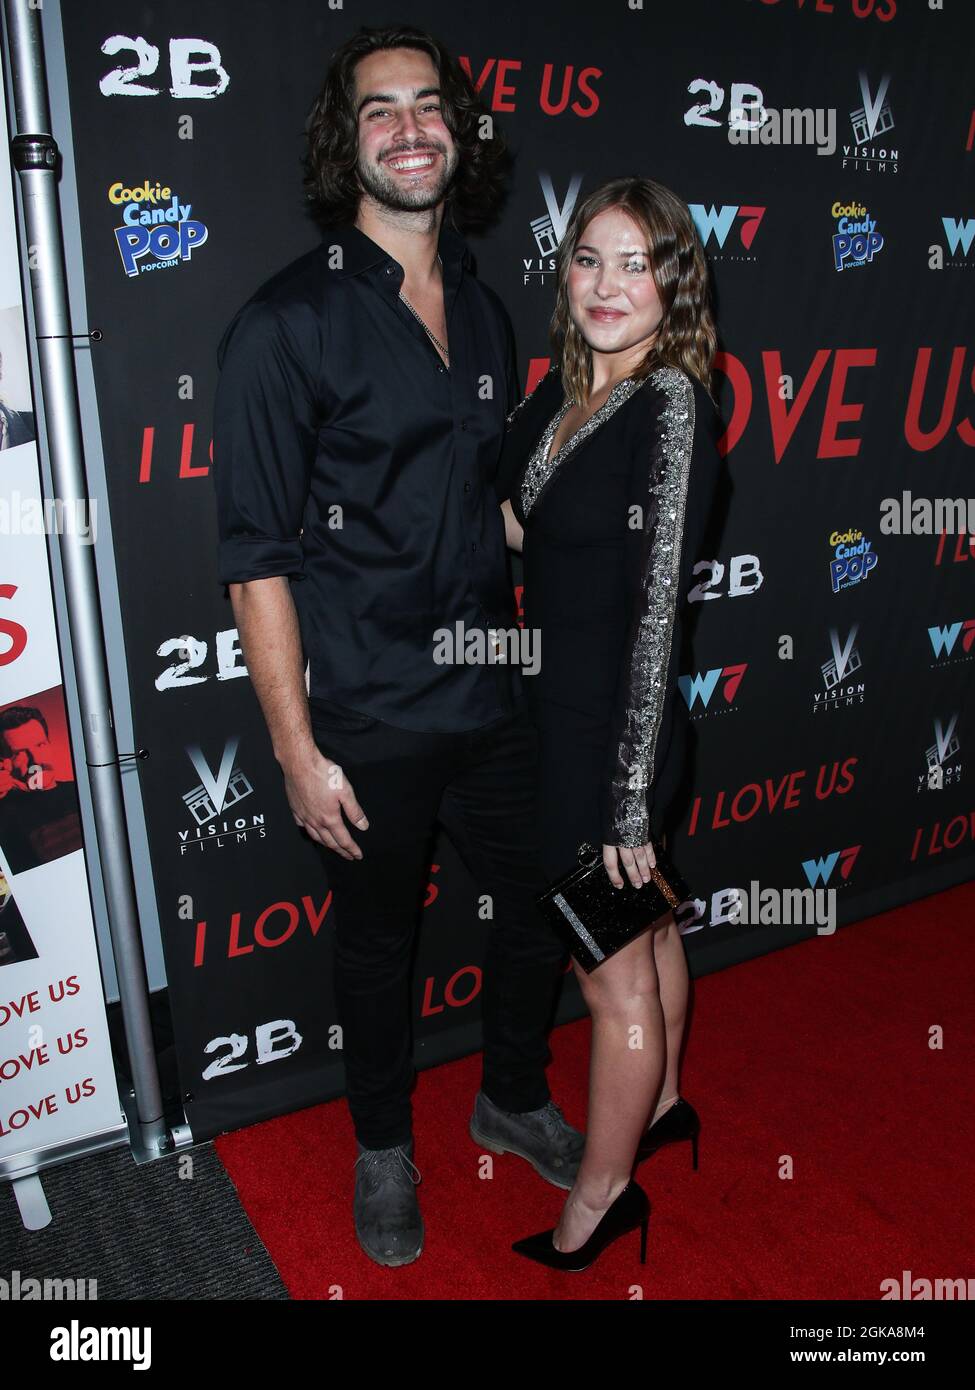 Hollywood, United States. 13th Sep, 2021. HOLLYWOOD, LOS ANGELES, CALIFORNIA, USA - SEPTEMBER 13: James Robert Brookes and girlfriend/actress Jasper Polish arrive at the Los Angeles Premiere Of Vision Films' 'I Love Us' held at the Harmony Gold Theater on September 13, 2021 in Hollywood, Los Angeles, California, United States. (Photo by Xavier Collin/Image Press Agency) Credit: Image Press Agency/Alamy Live News Stock Photo